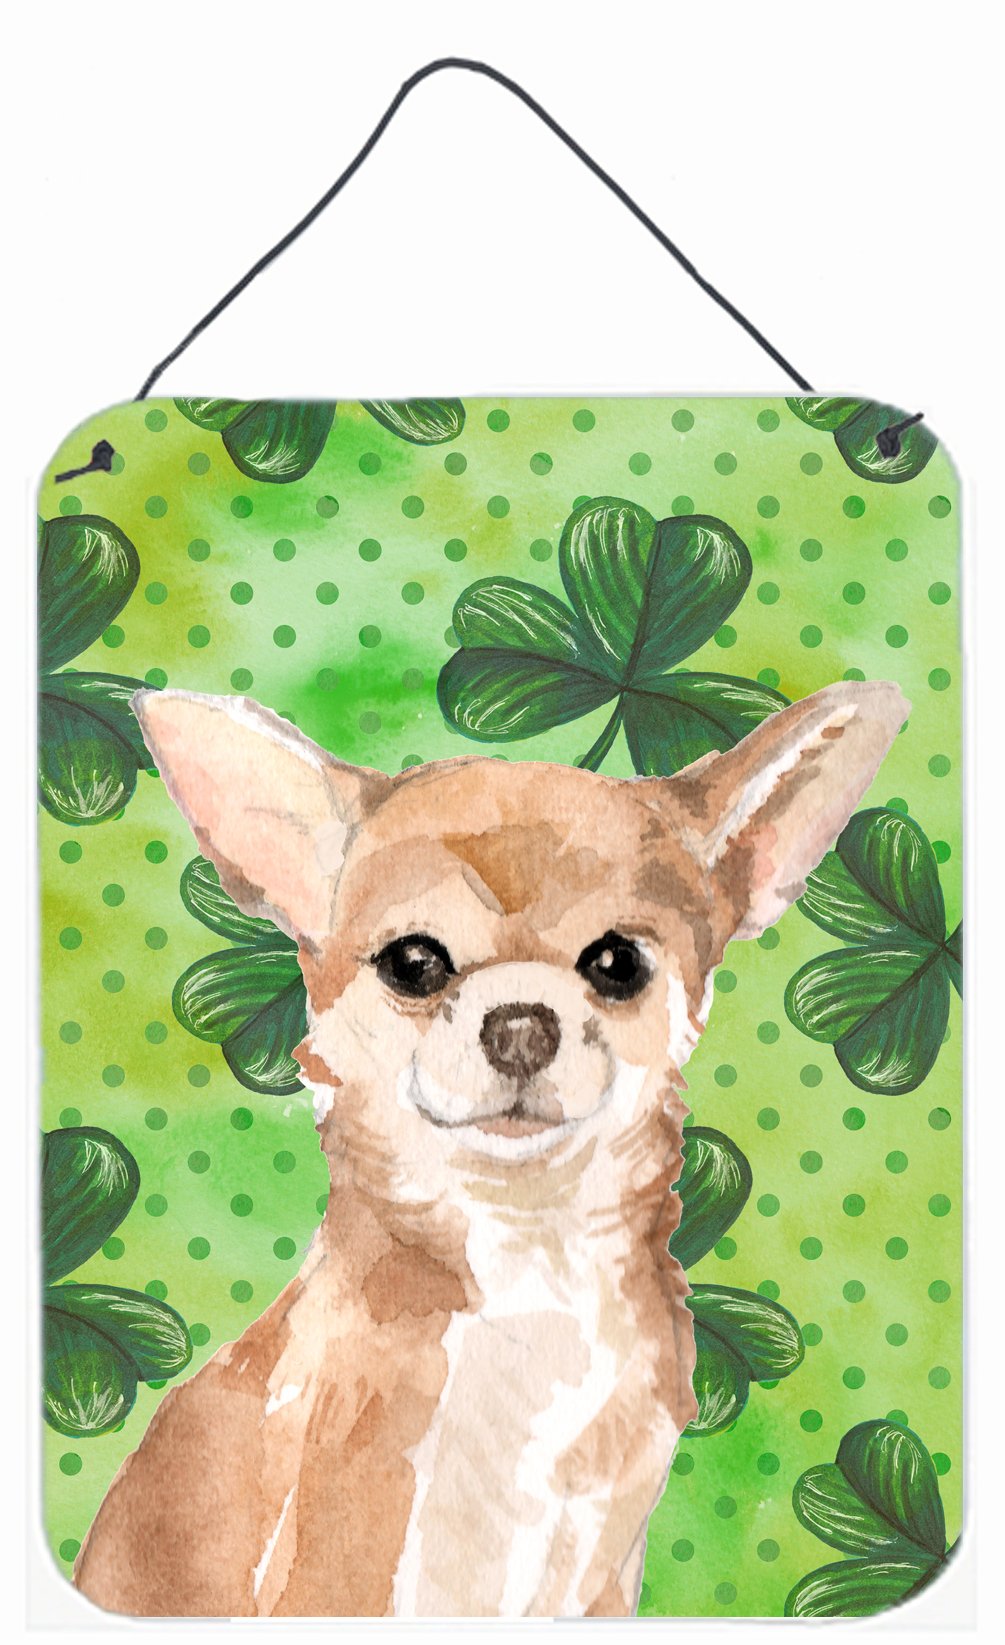 Chihuahua St. Patrick's Wall or Door Hanging Prints BB9551DS1216 by Caroline's Treasures